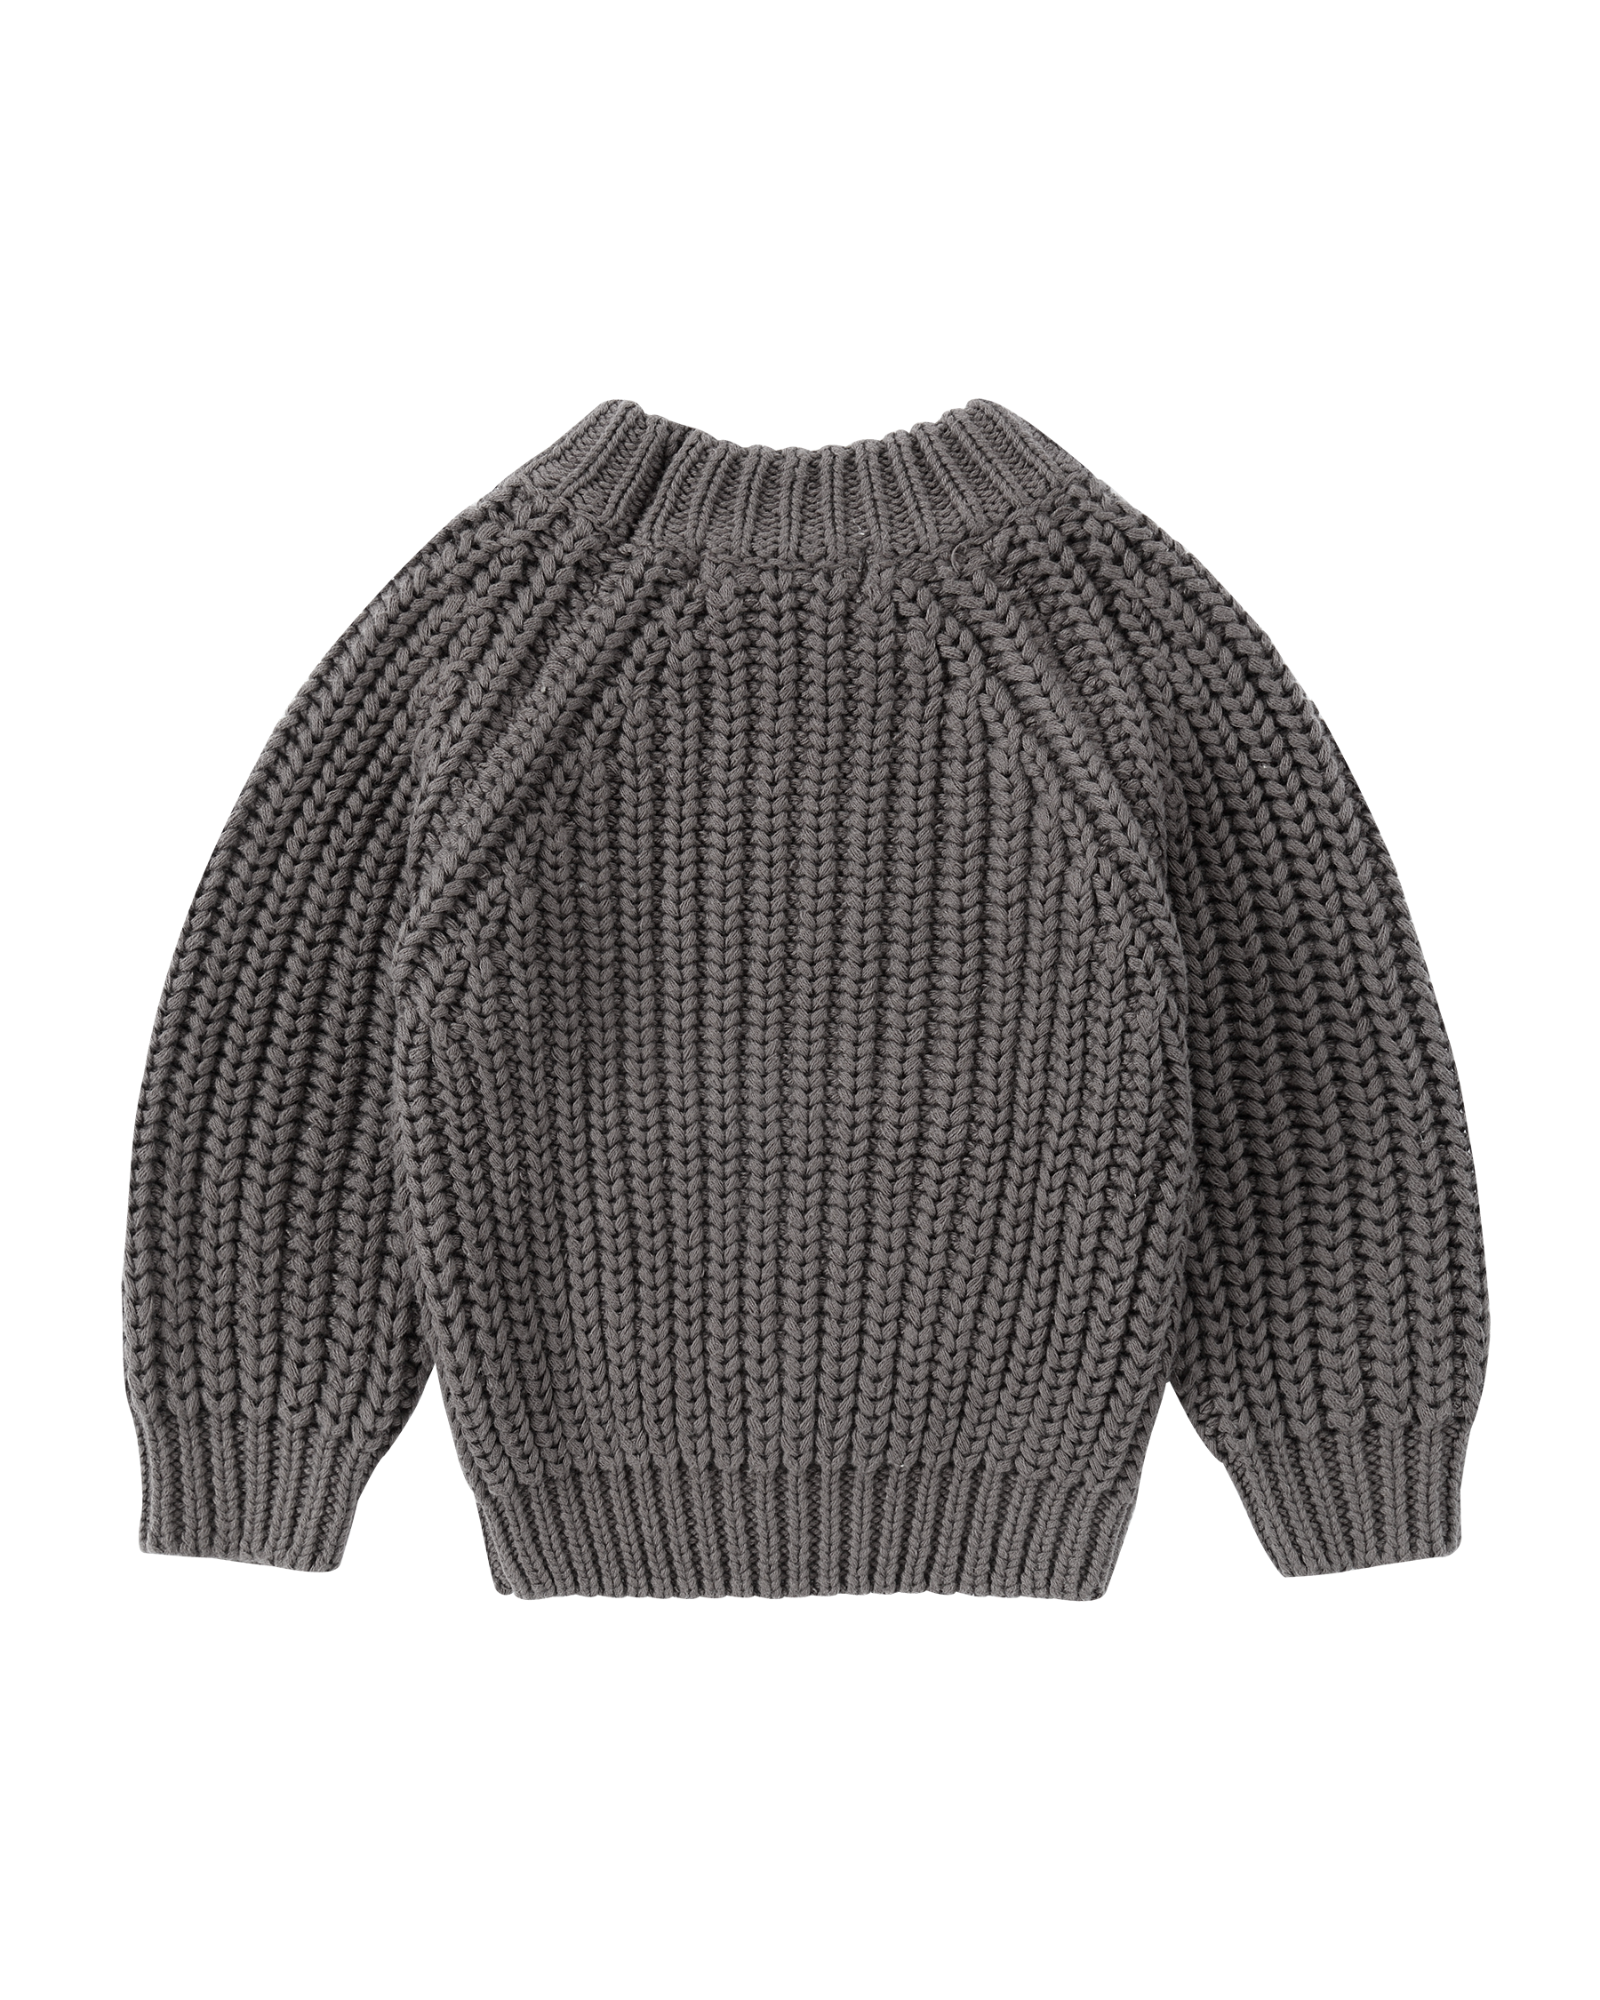 Knit Chunky Pullover. Lava Rock